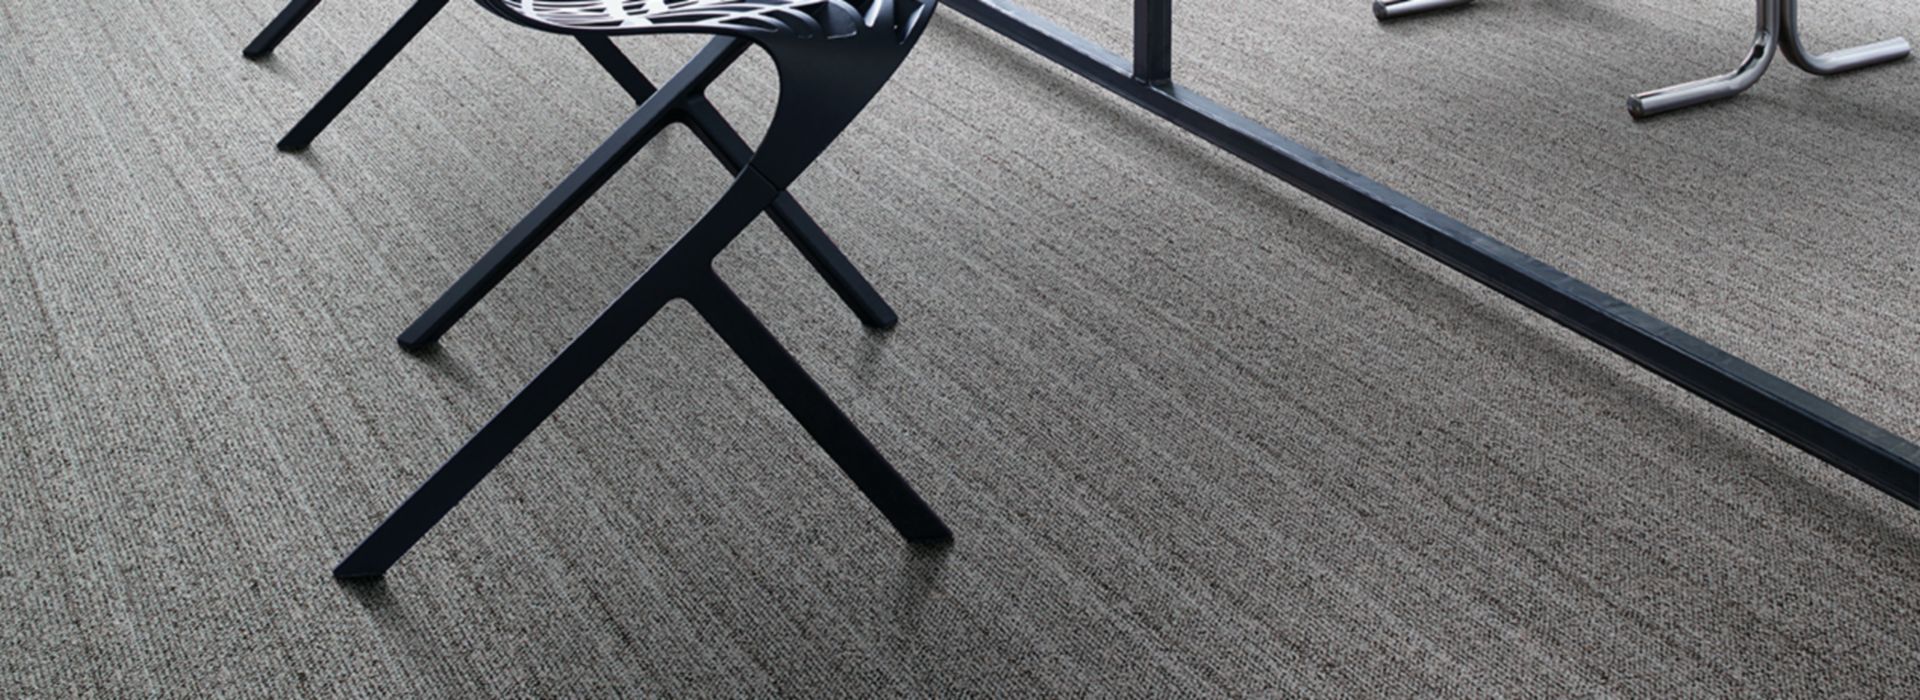 Interface WW860 plank carpet tile in work area with table and chairs numéro d’image 1